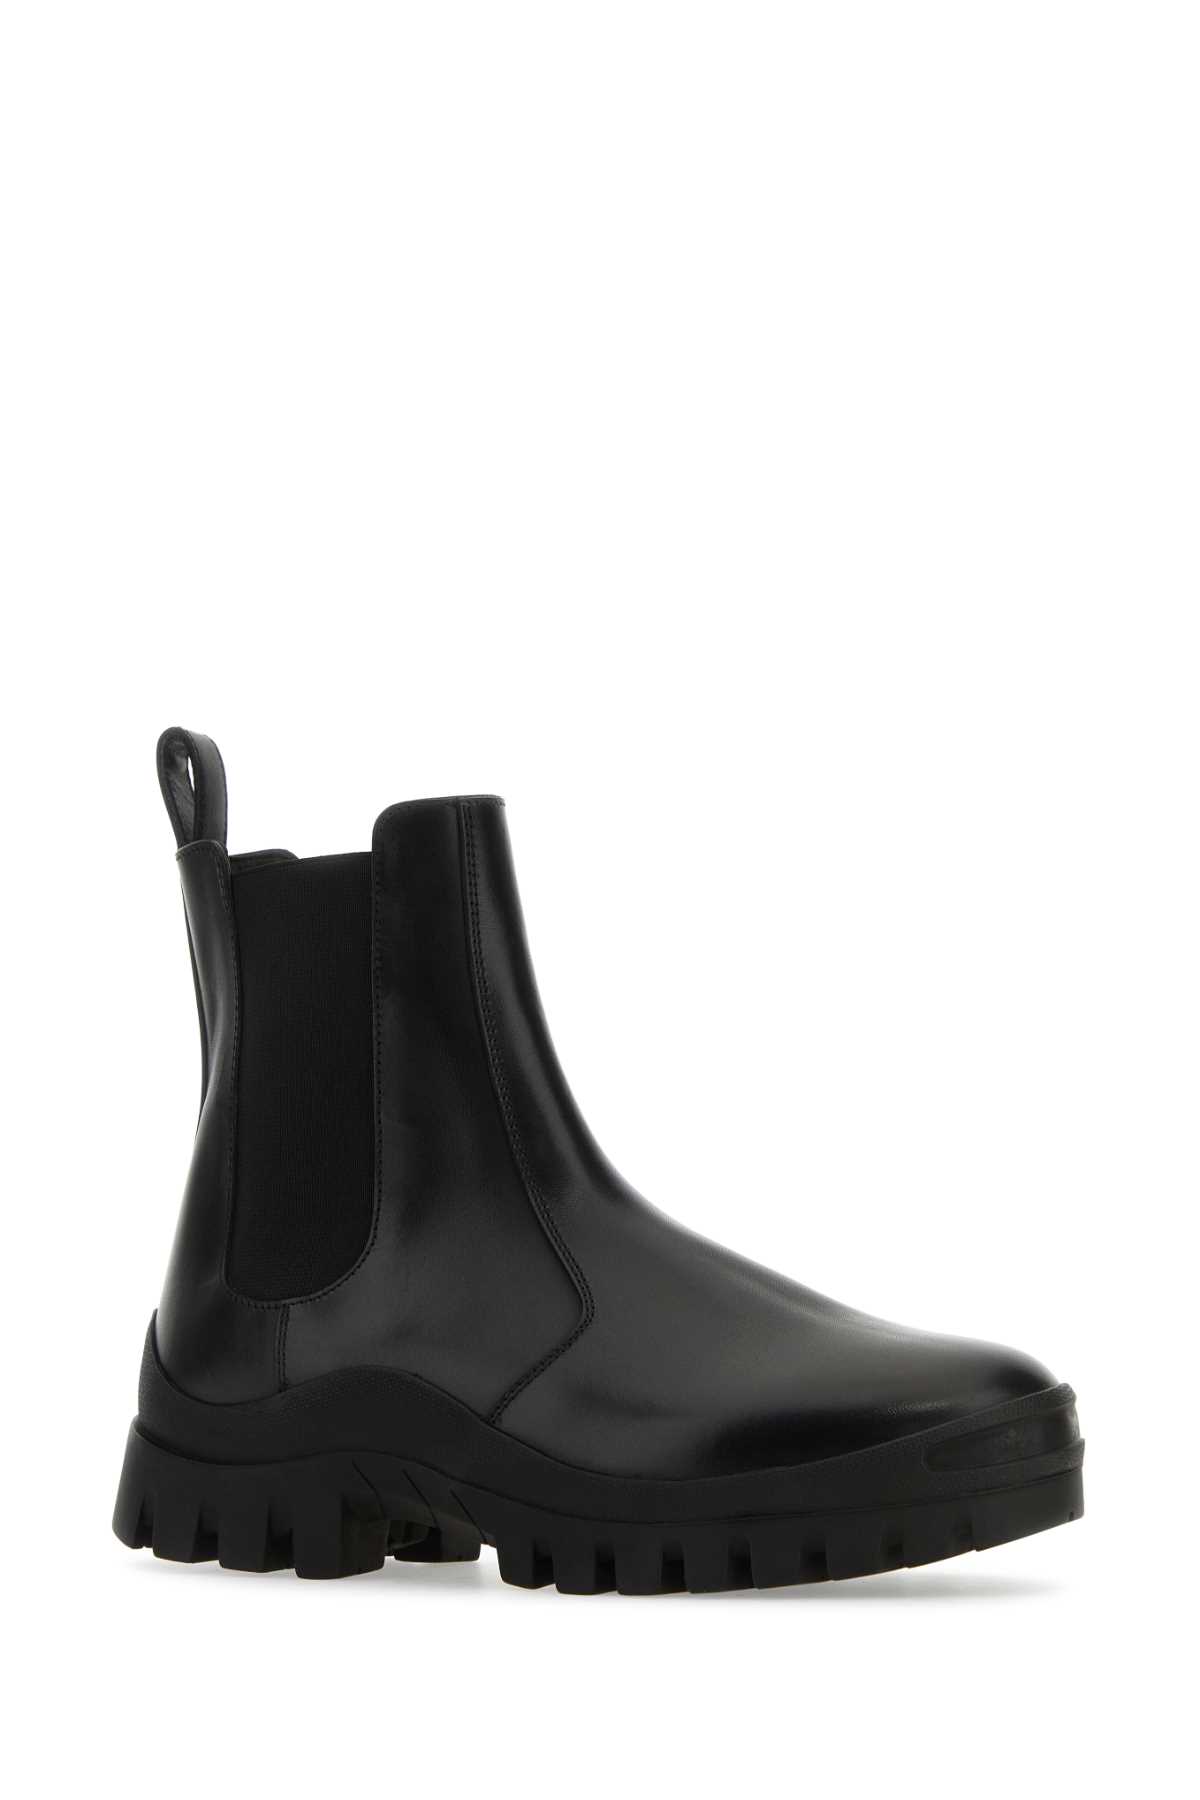 Shop The Row Black Leather Greta Winter Ankle Boots